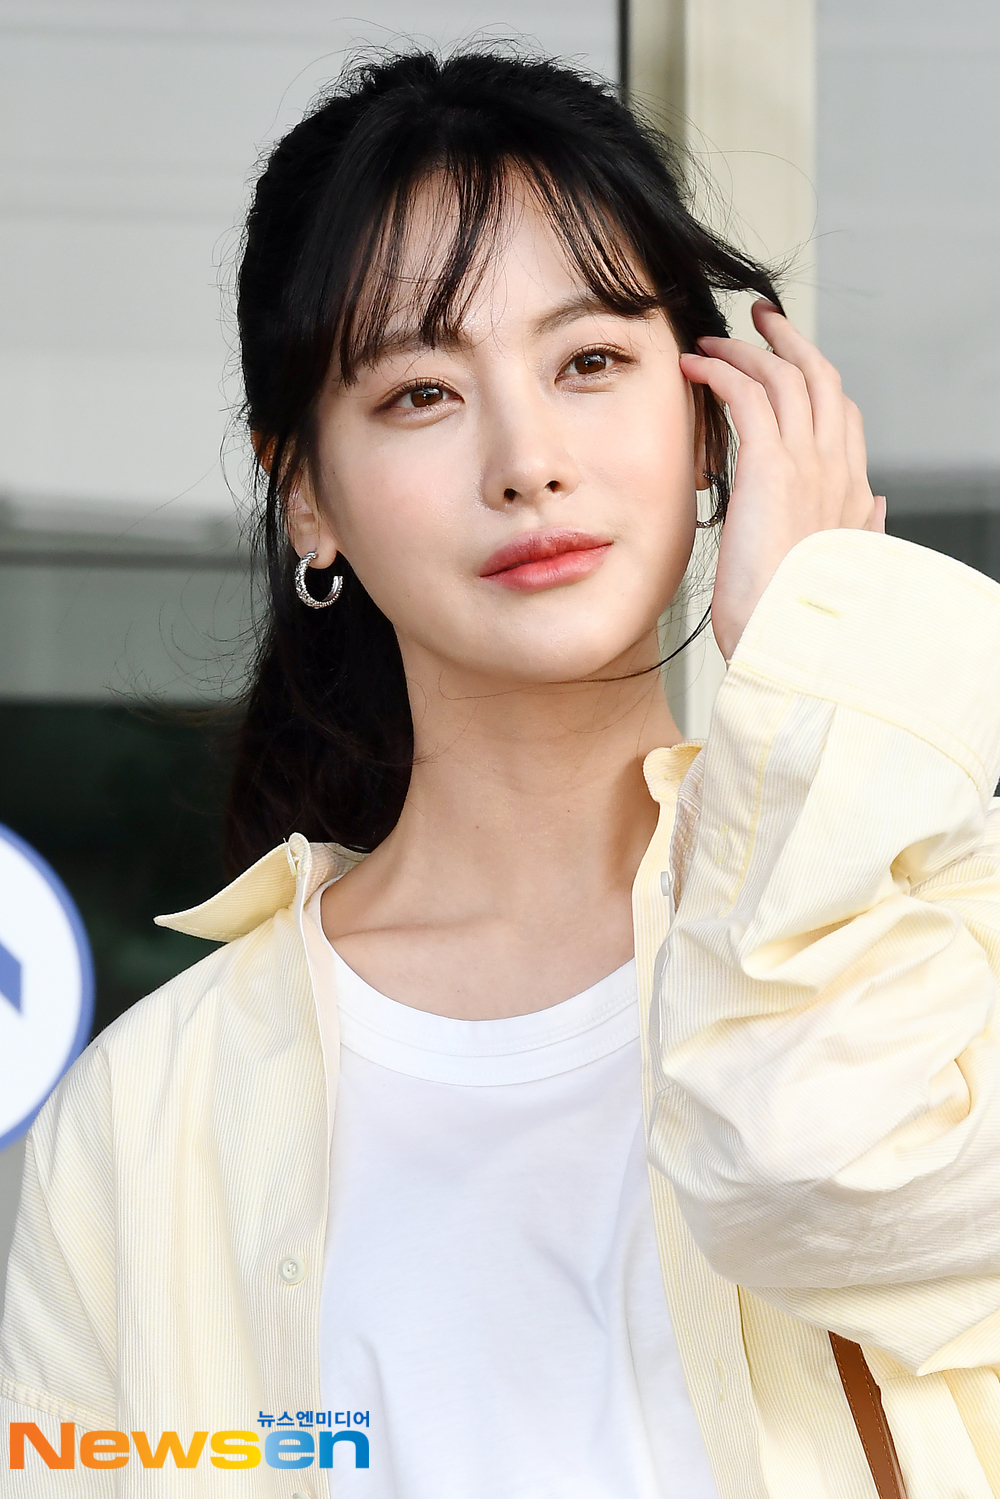 <p>Actress Oh Yeon-seo 4 October 16 afternoon, Incheon, Jung-operation in Incheon International Airport through a magazine photo shoot car to Phuket Departure.</p><p>Actress Oh Yeon-seo Airport fashion, and Phuket Departure.</p>